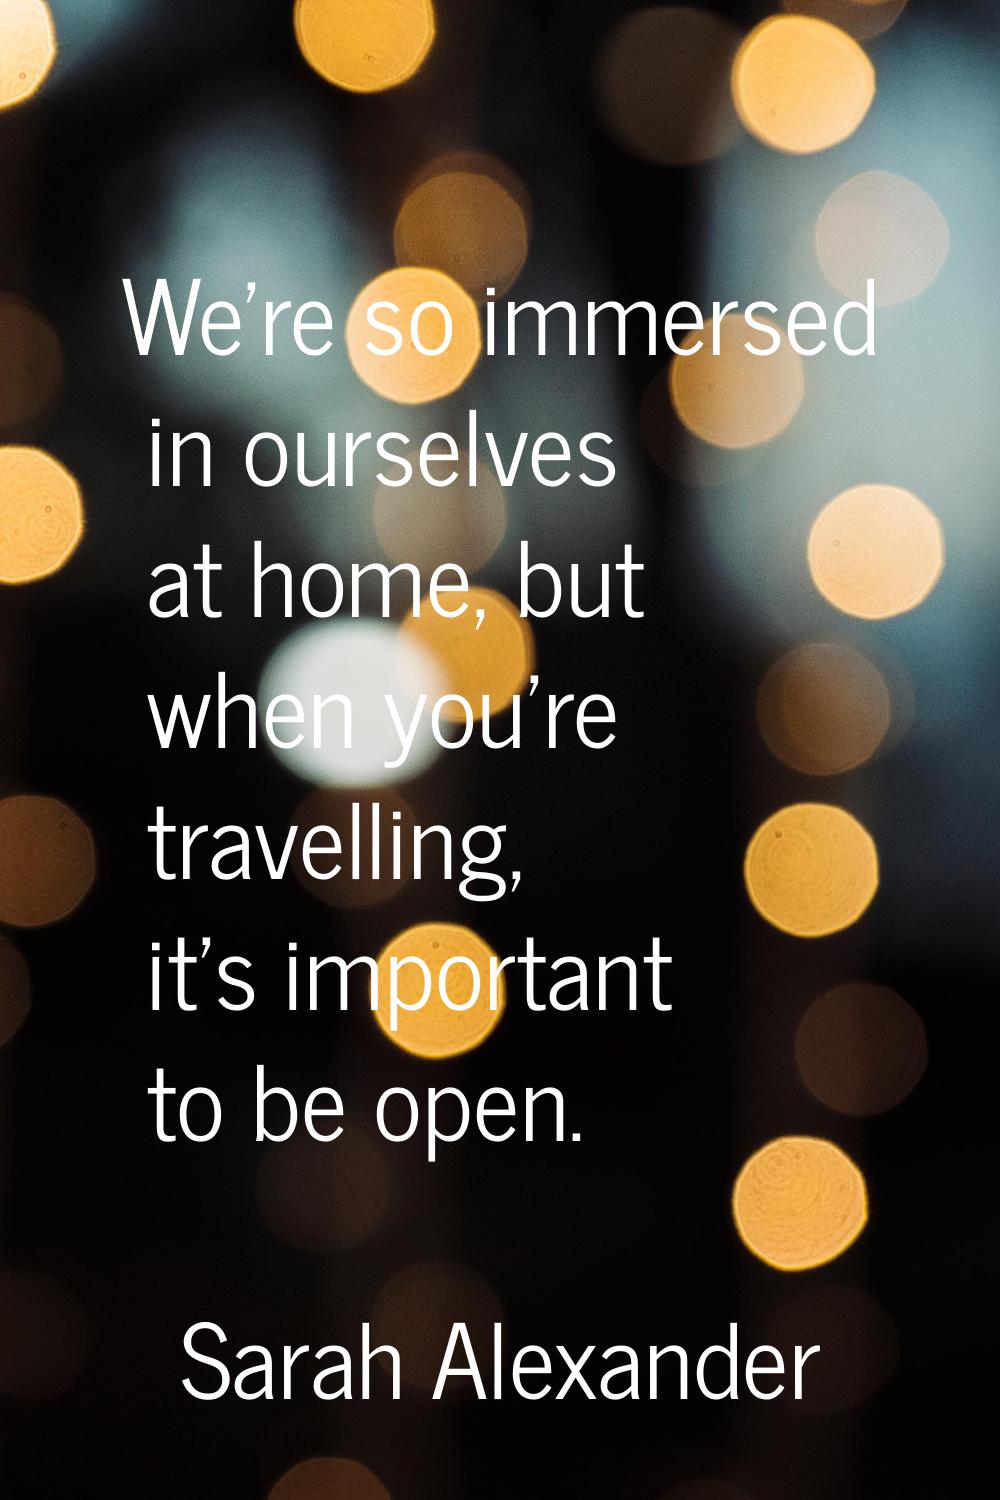 We're so immersed in ourselves at home, but when you're travelling, it's important to be open.